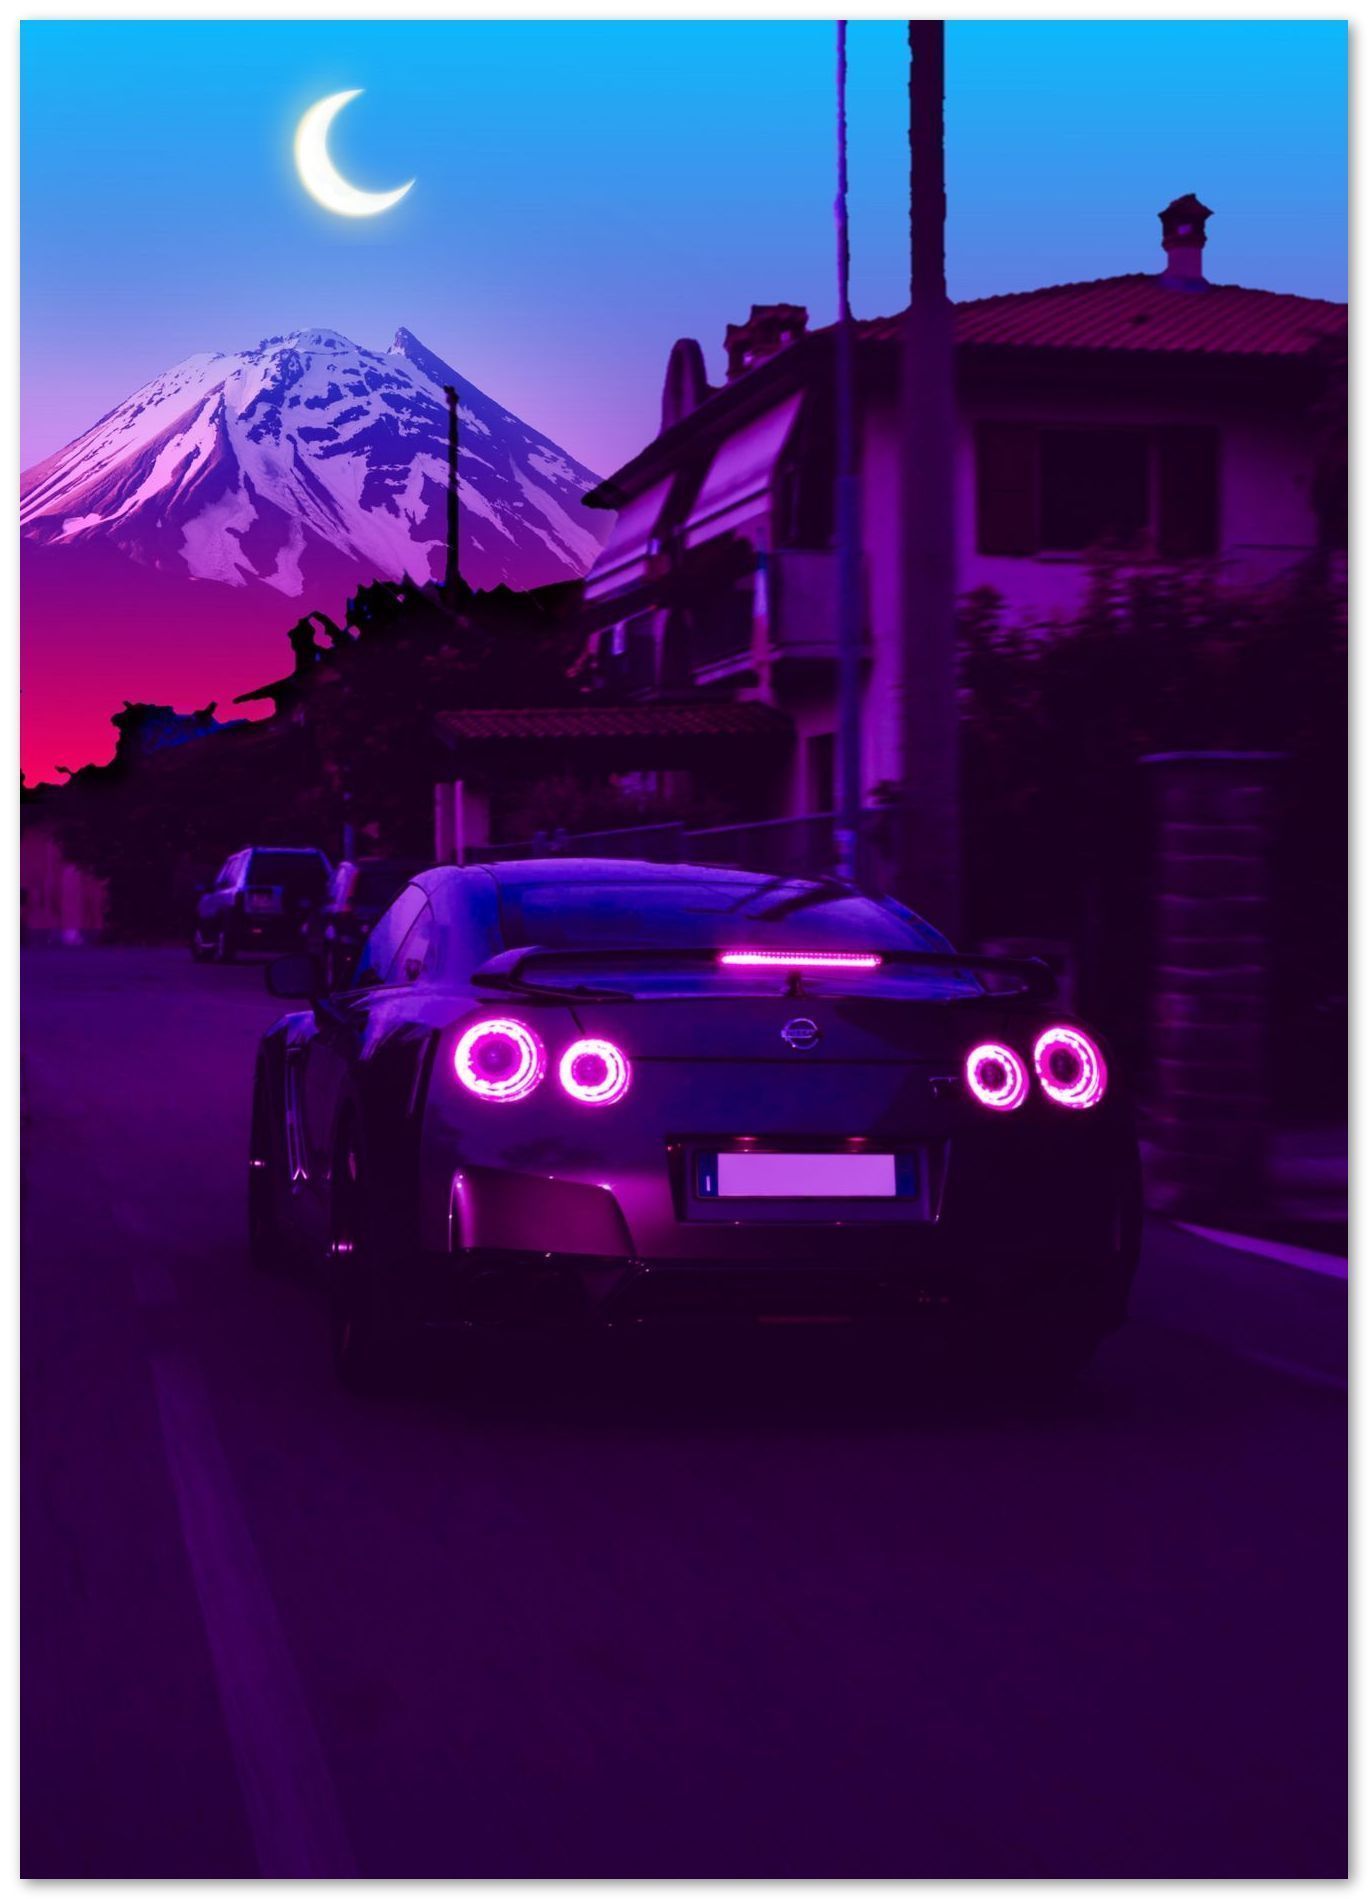 A Nissan GTR with purple lights in front of a mountain - Nissan Skyline